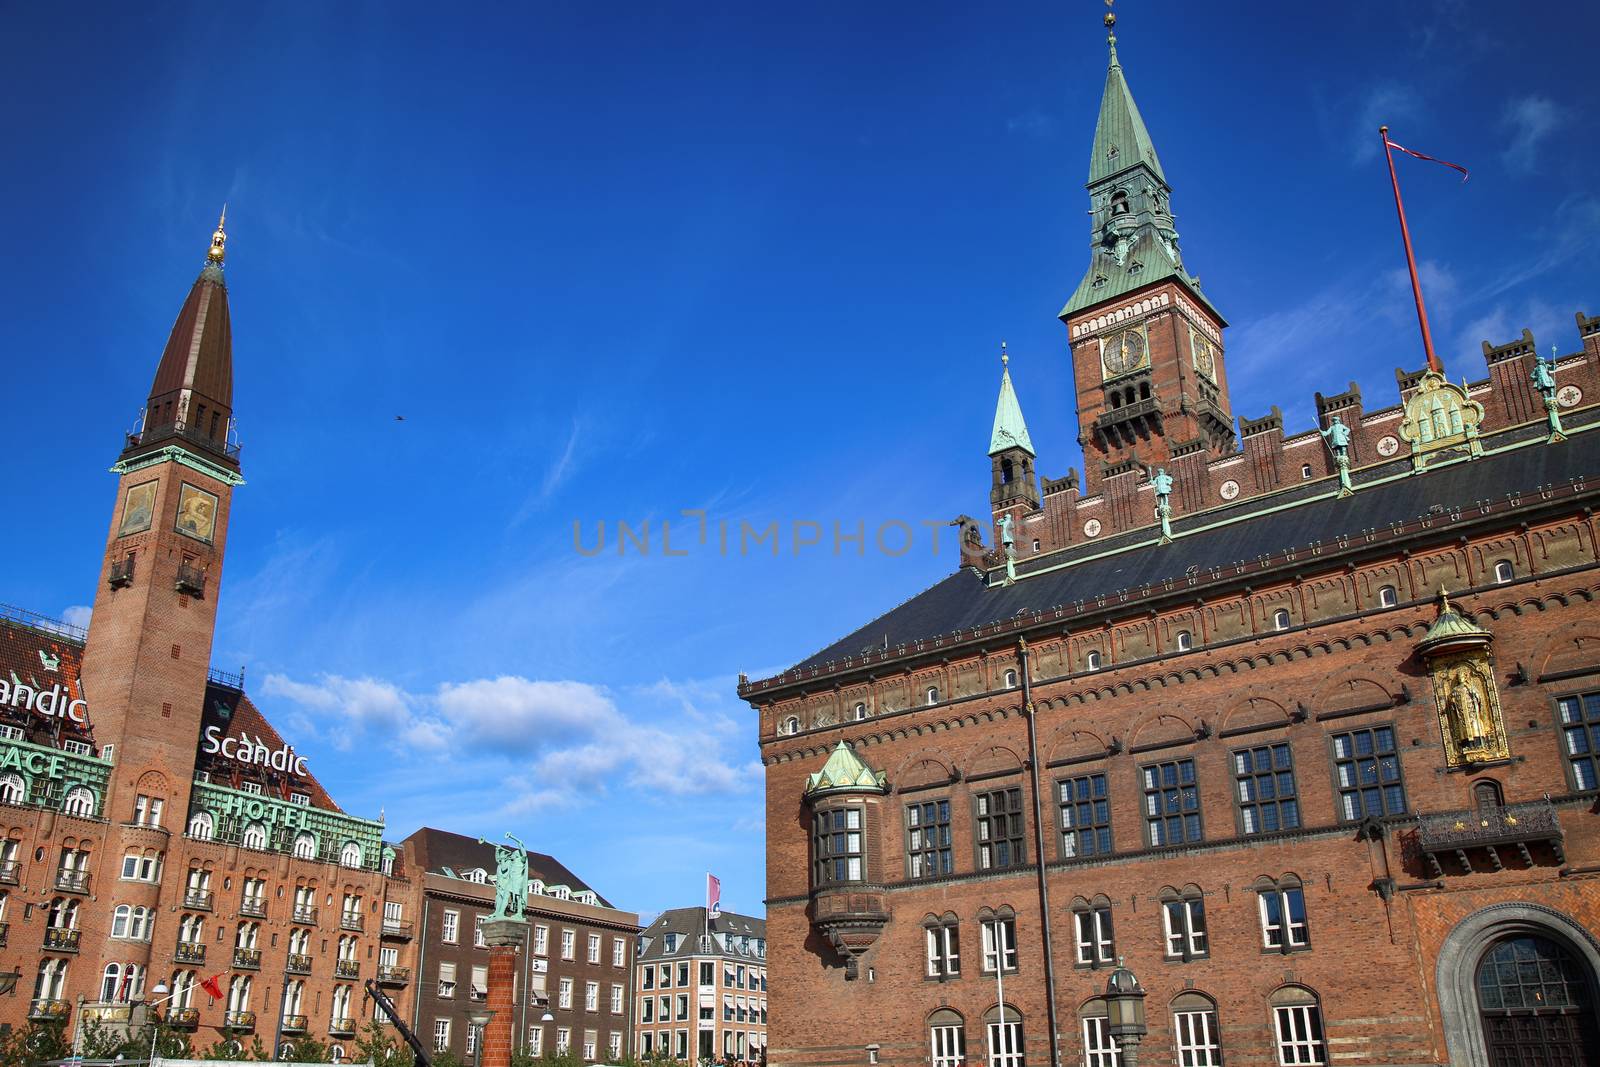 COPENHAGEN, DENMARK - AUGUST 15, 2016: Scandic Palace Hotel is a residential hotel on City Hall Square and Radhus, Copenhagen city hall in Copenhagen, Denmark on August 15, 2016.